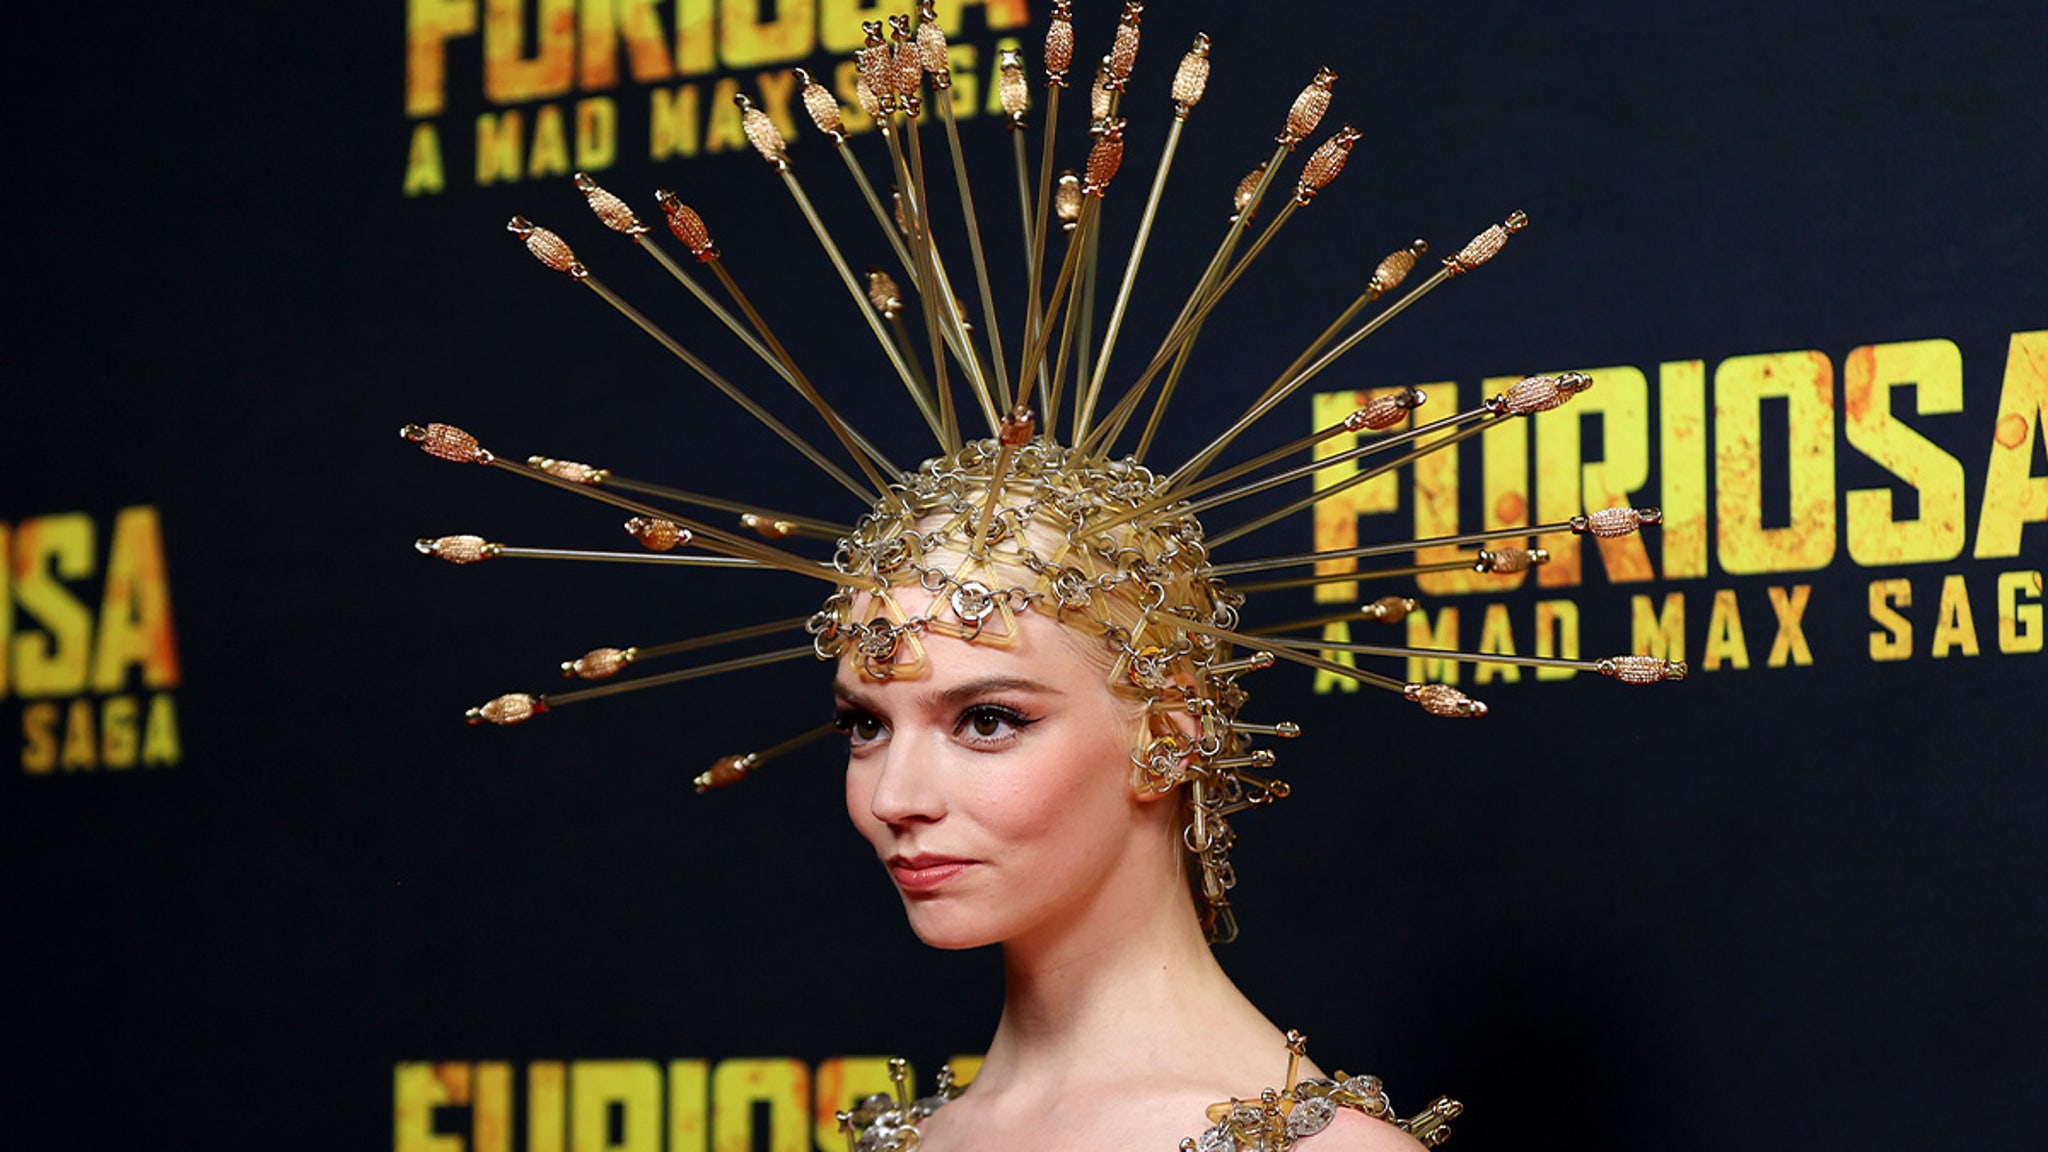 Anya Taylor-Joy Wears Sheer Dress Covered in Spikes to 'Furiosa' Premiere